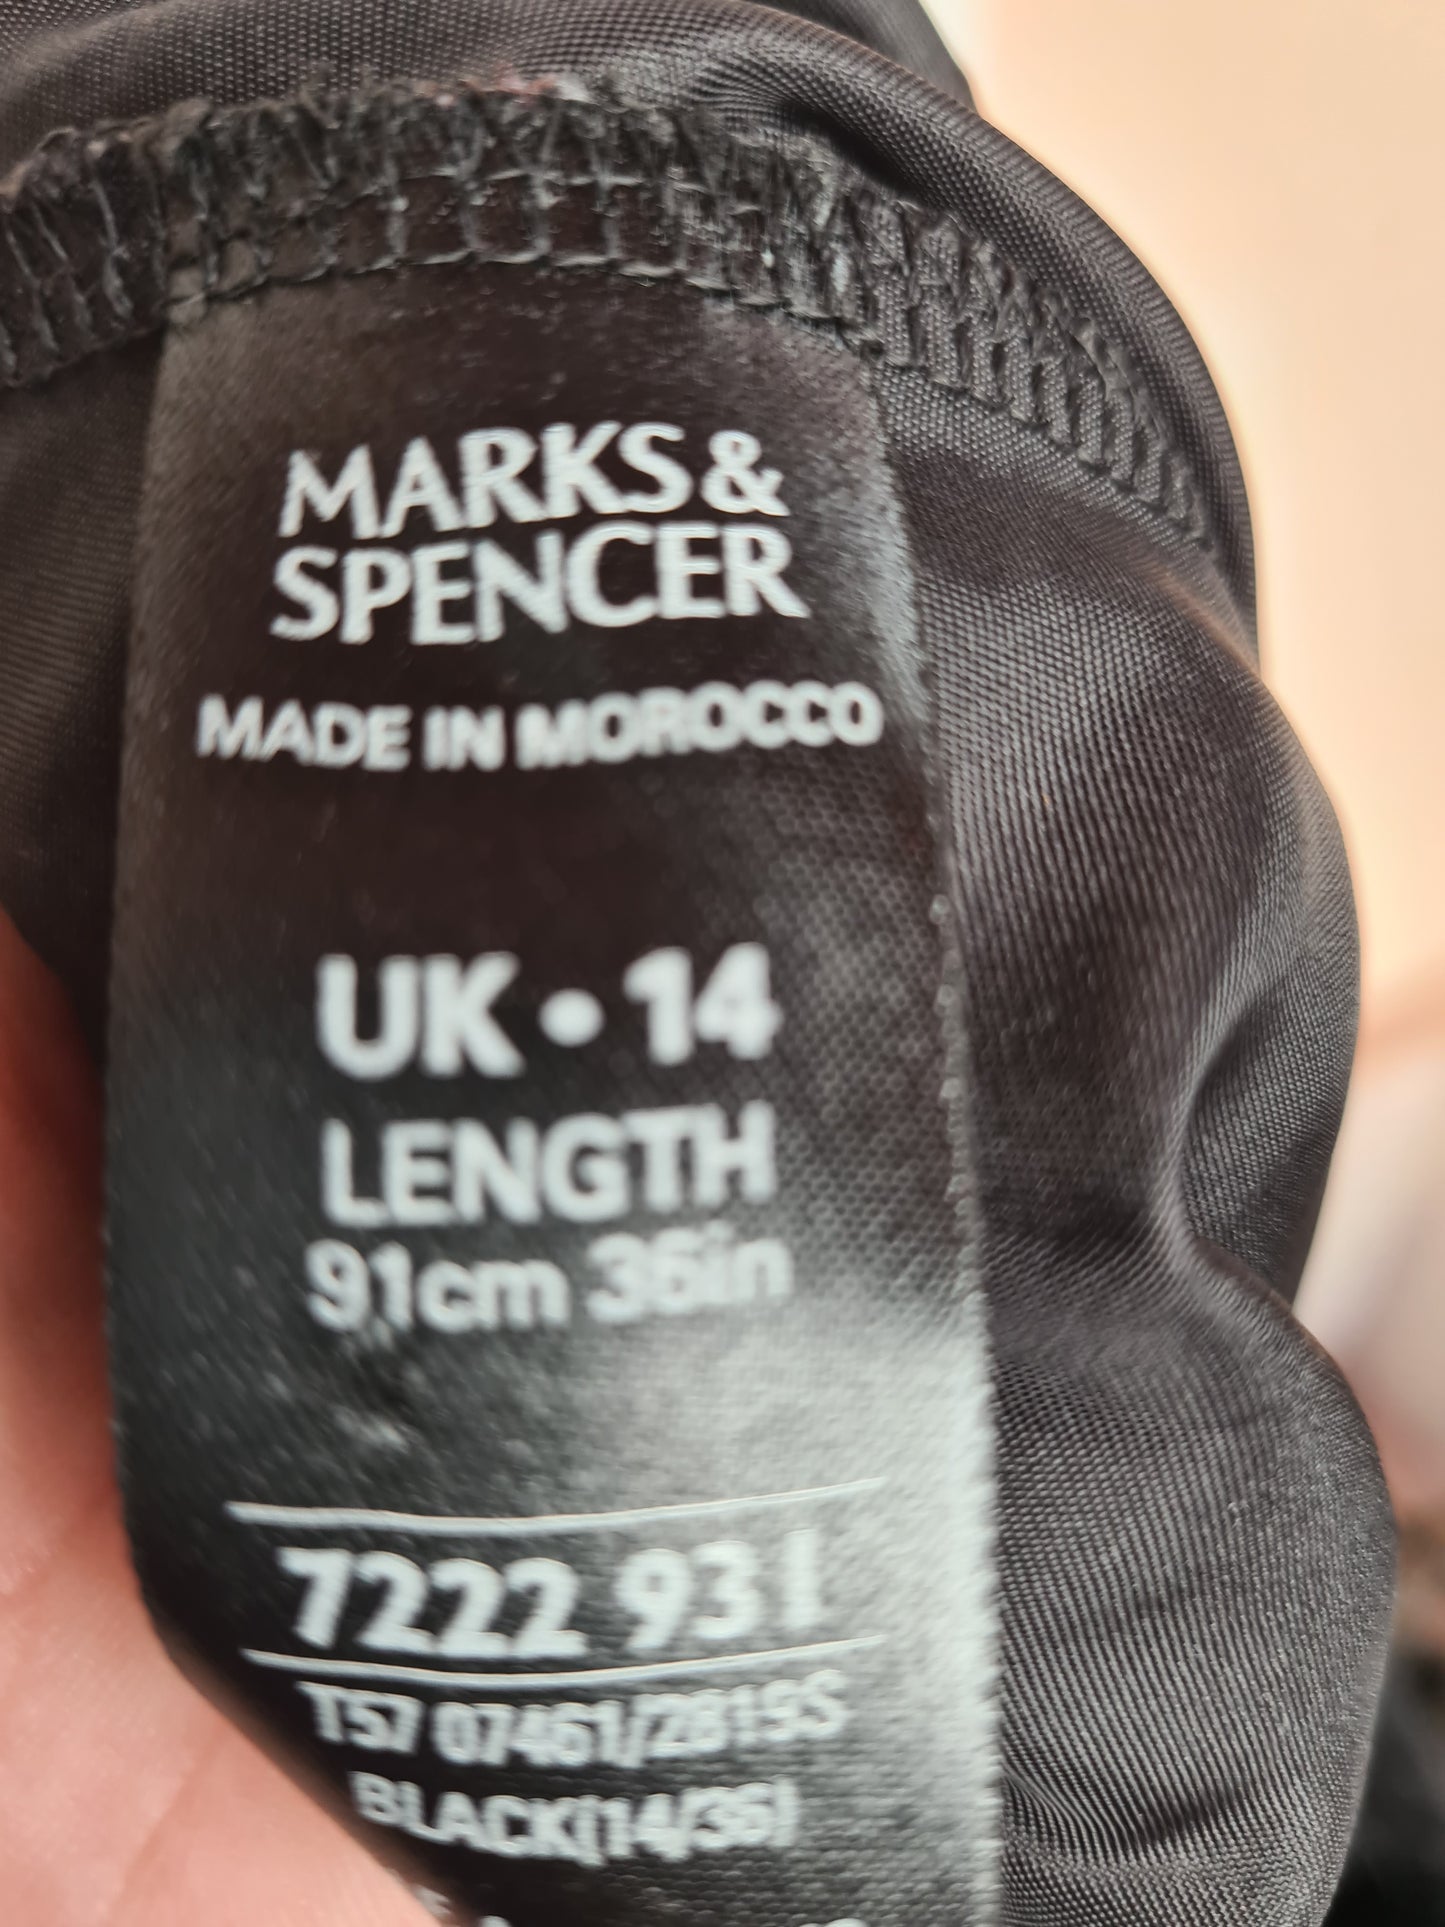 Marks and spencer in hand black skirt size 14 FREE POSTAGE ✅️